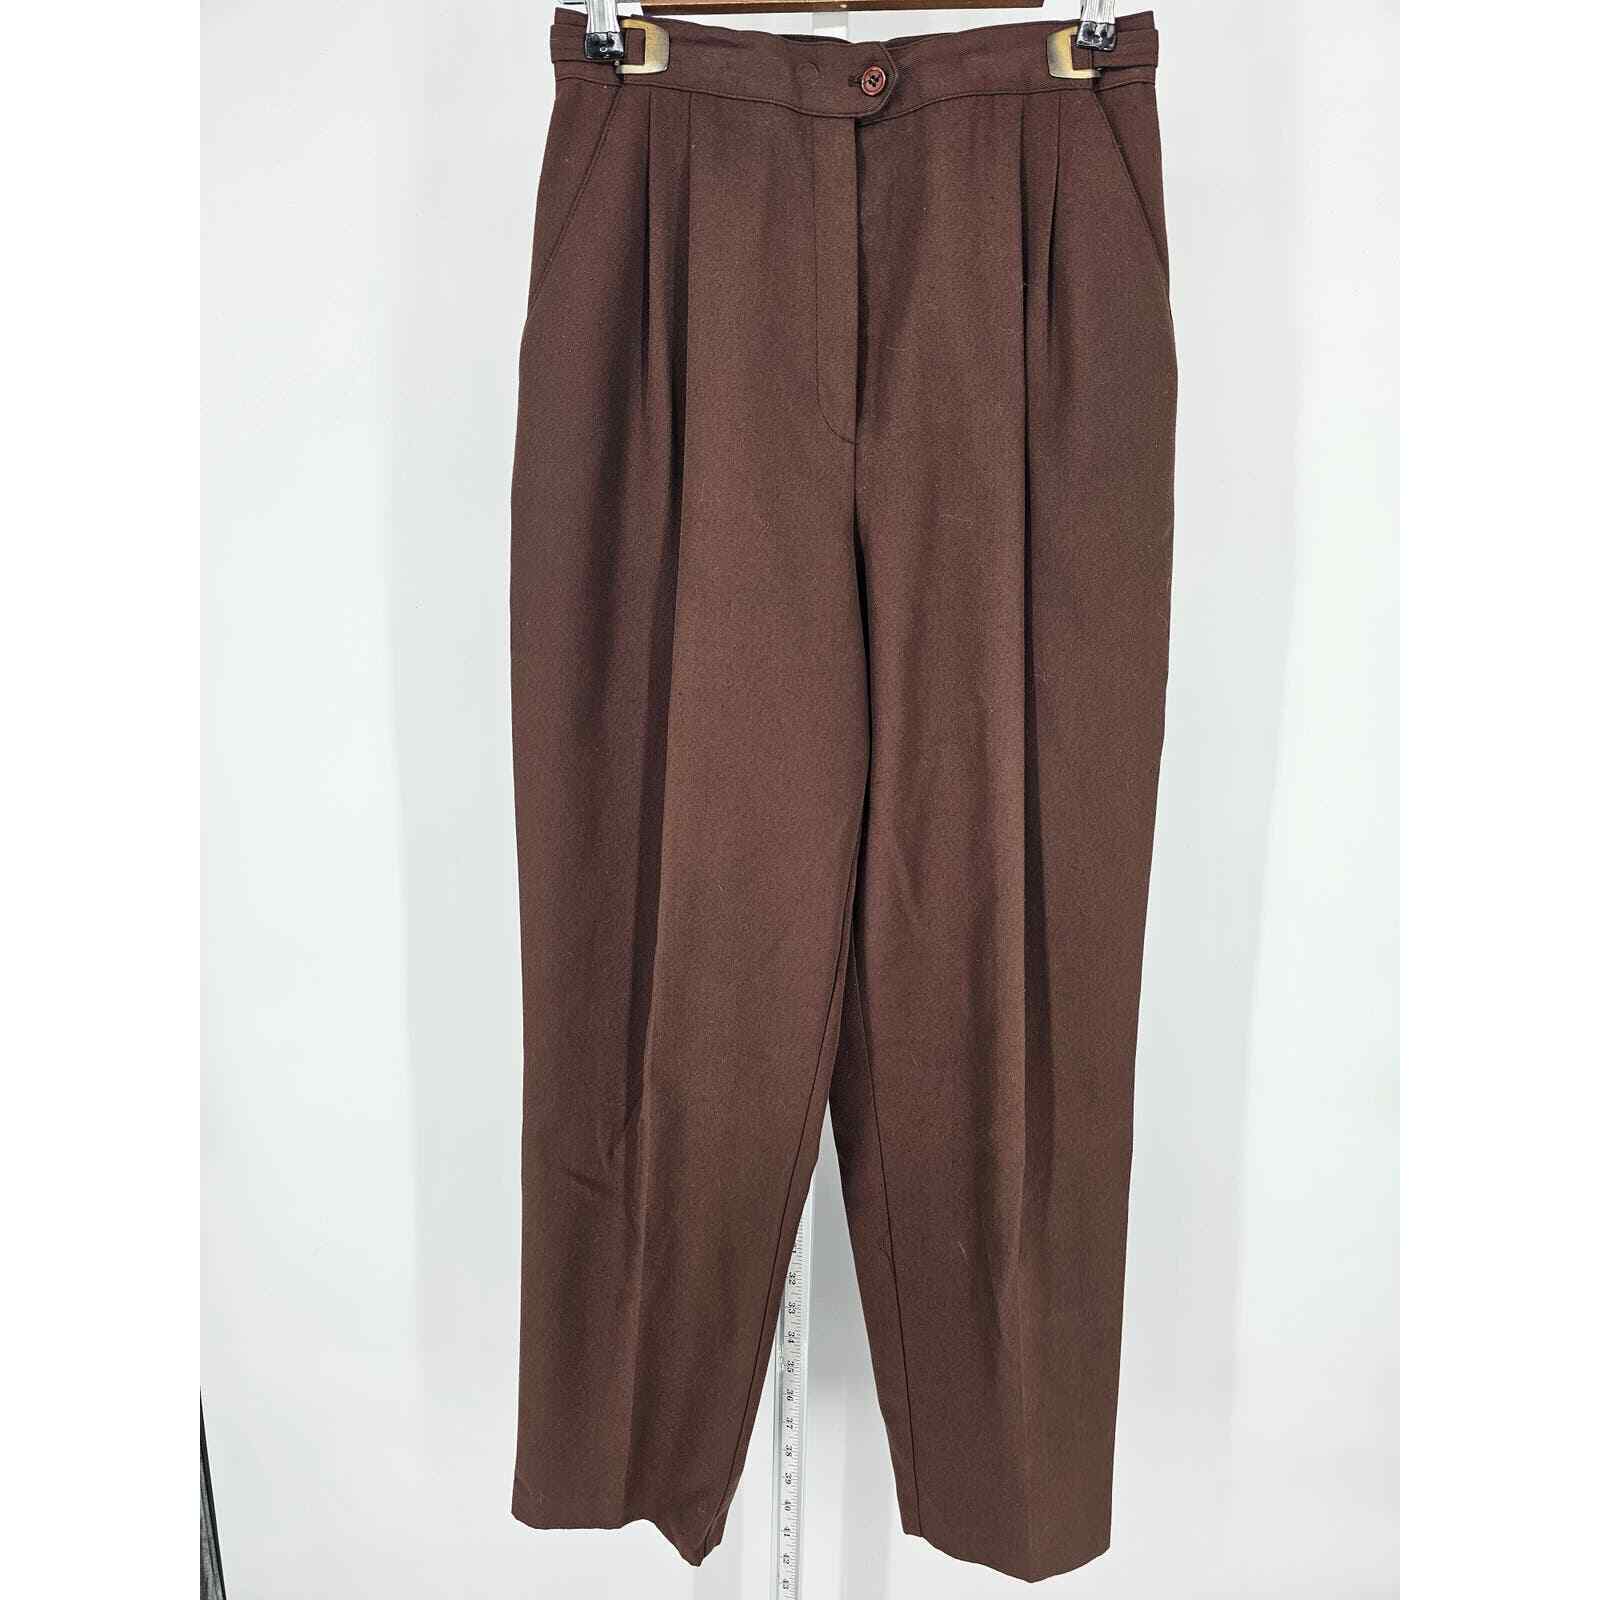 Vintage 1990s Counterparts Womens Sz 6 High Waist Dress Pants Brown Tapered